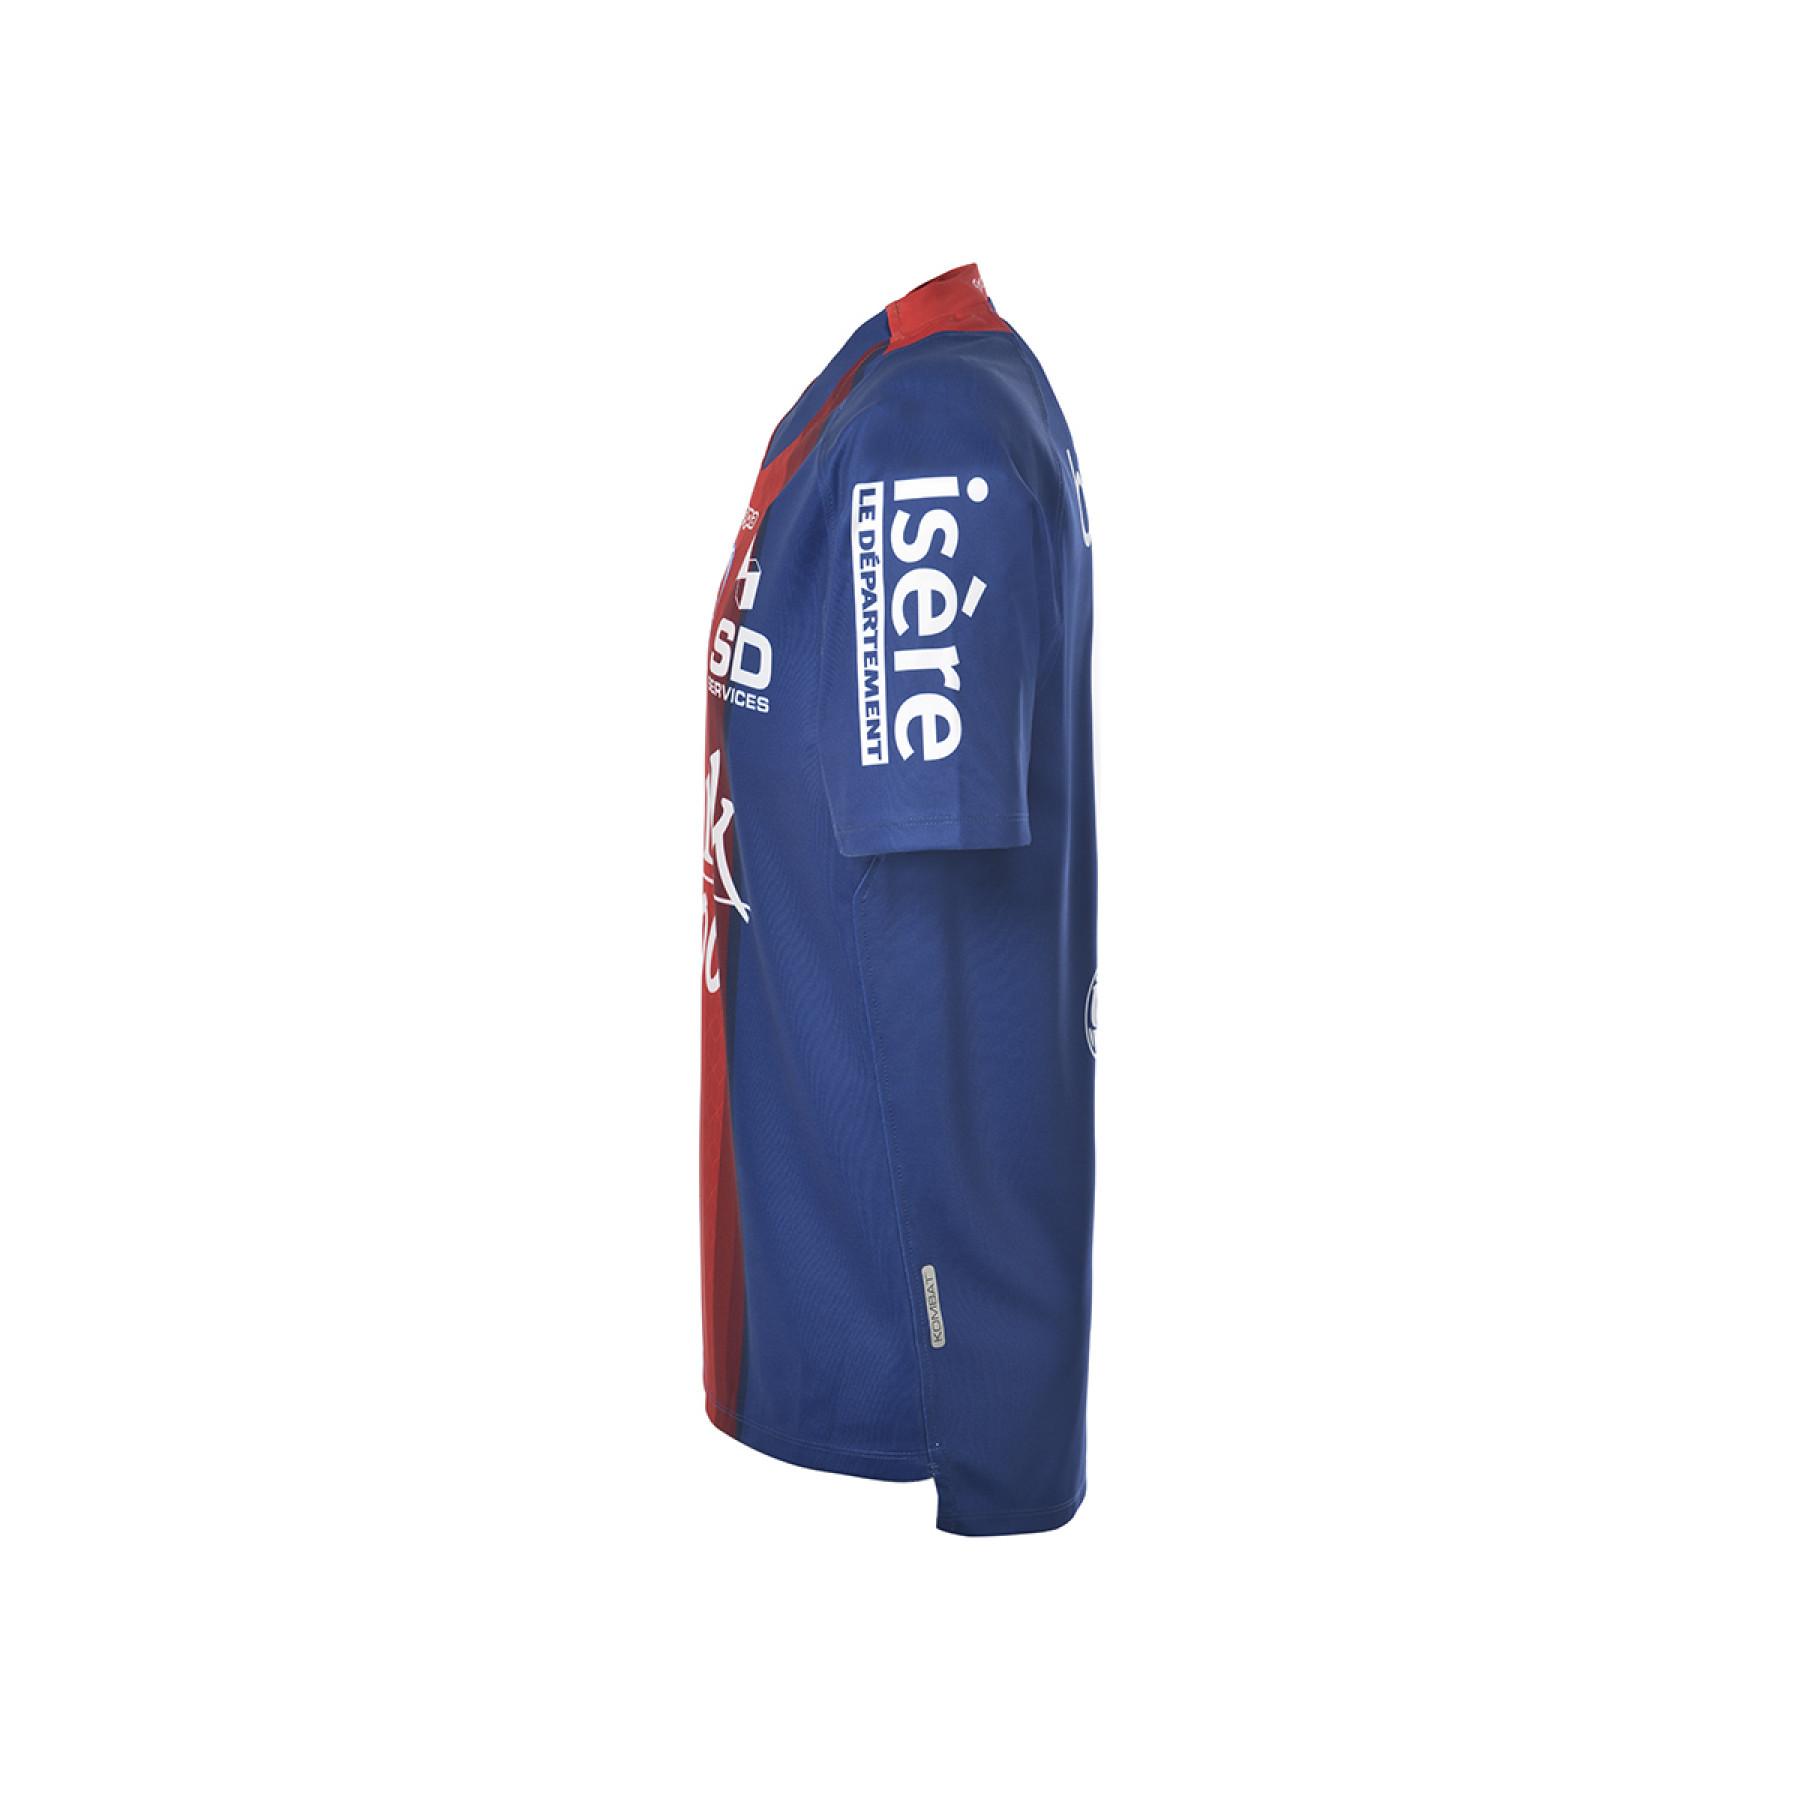 Children's home jersey FC Grenoble Rugby 2019/20